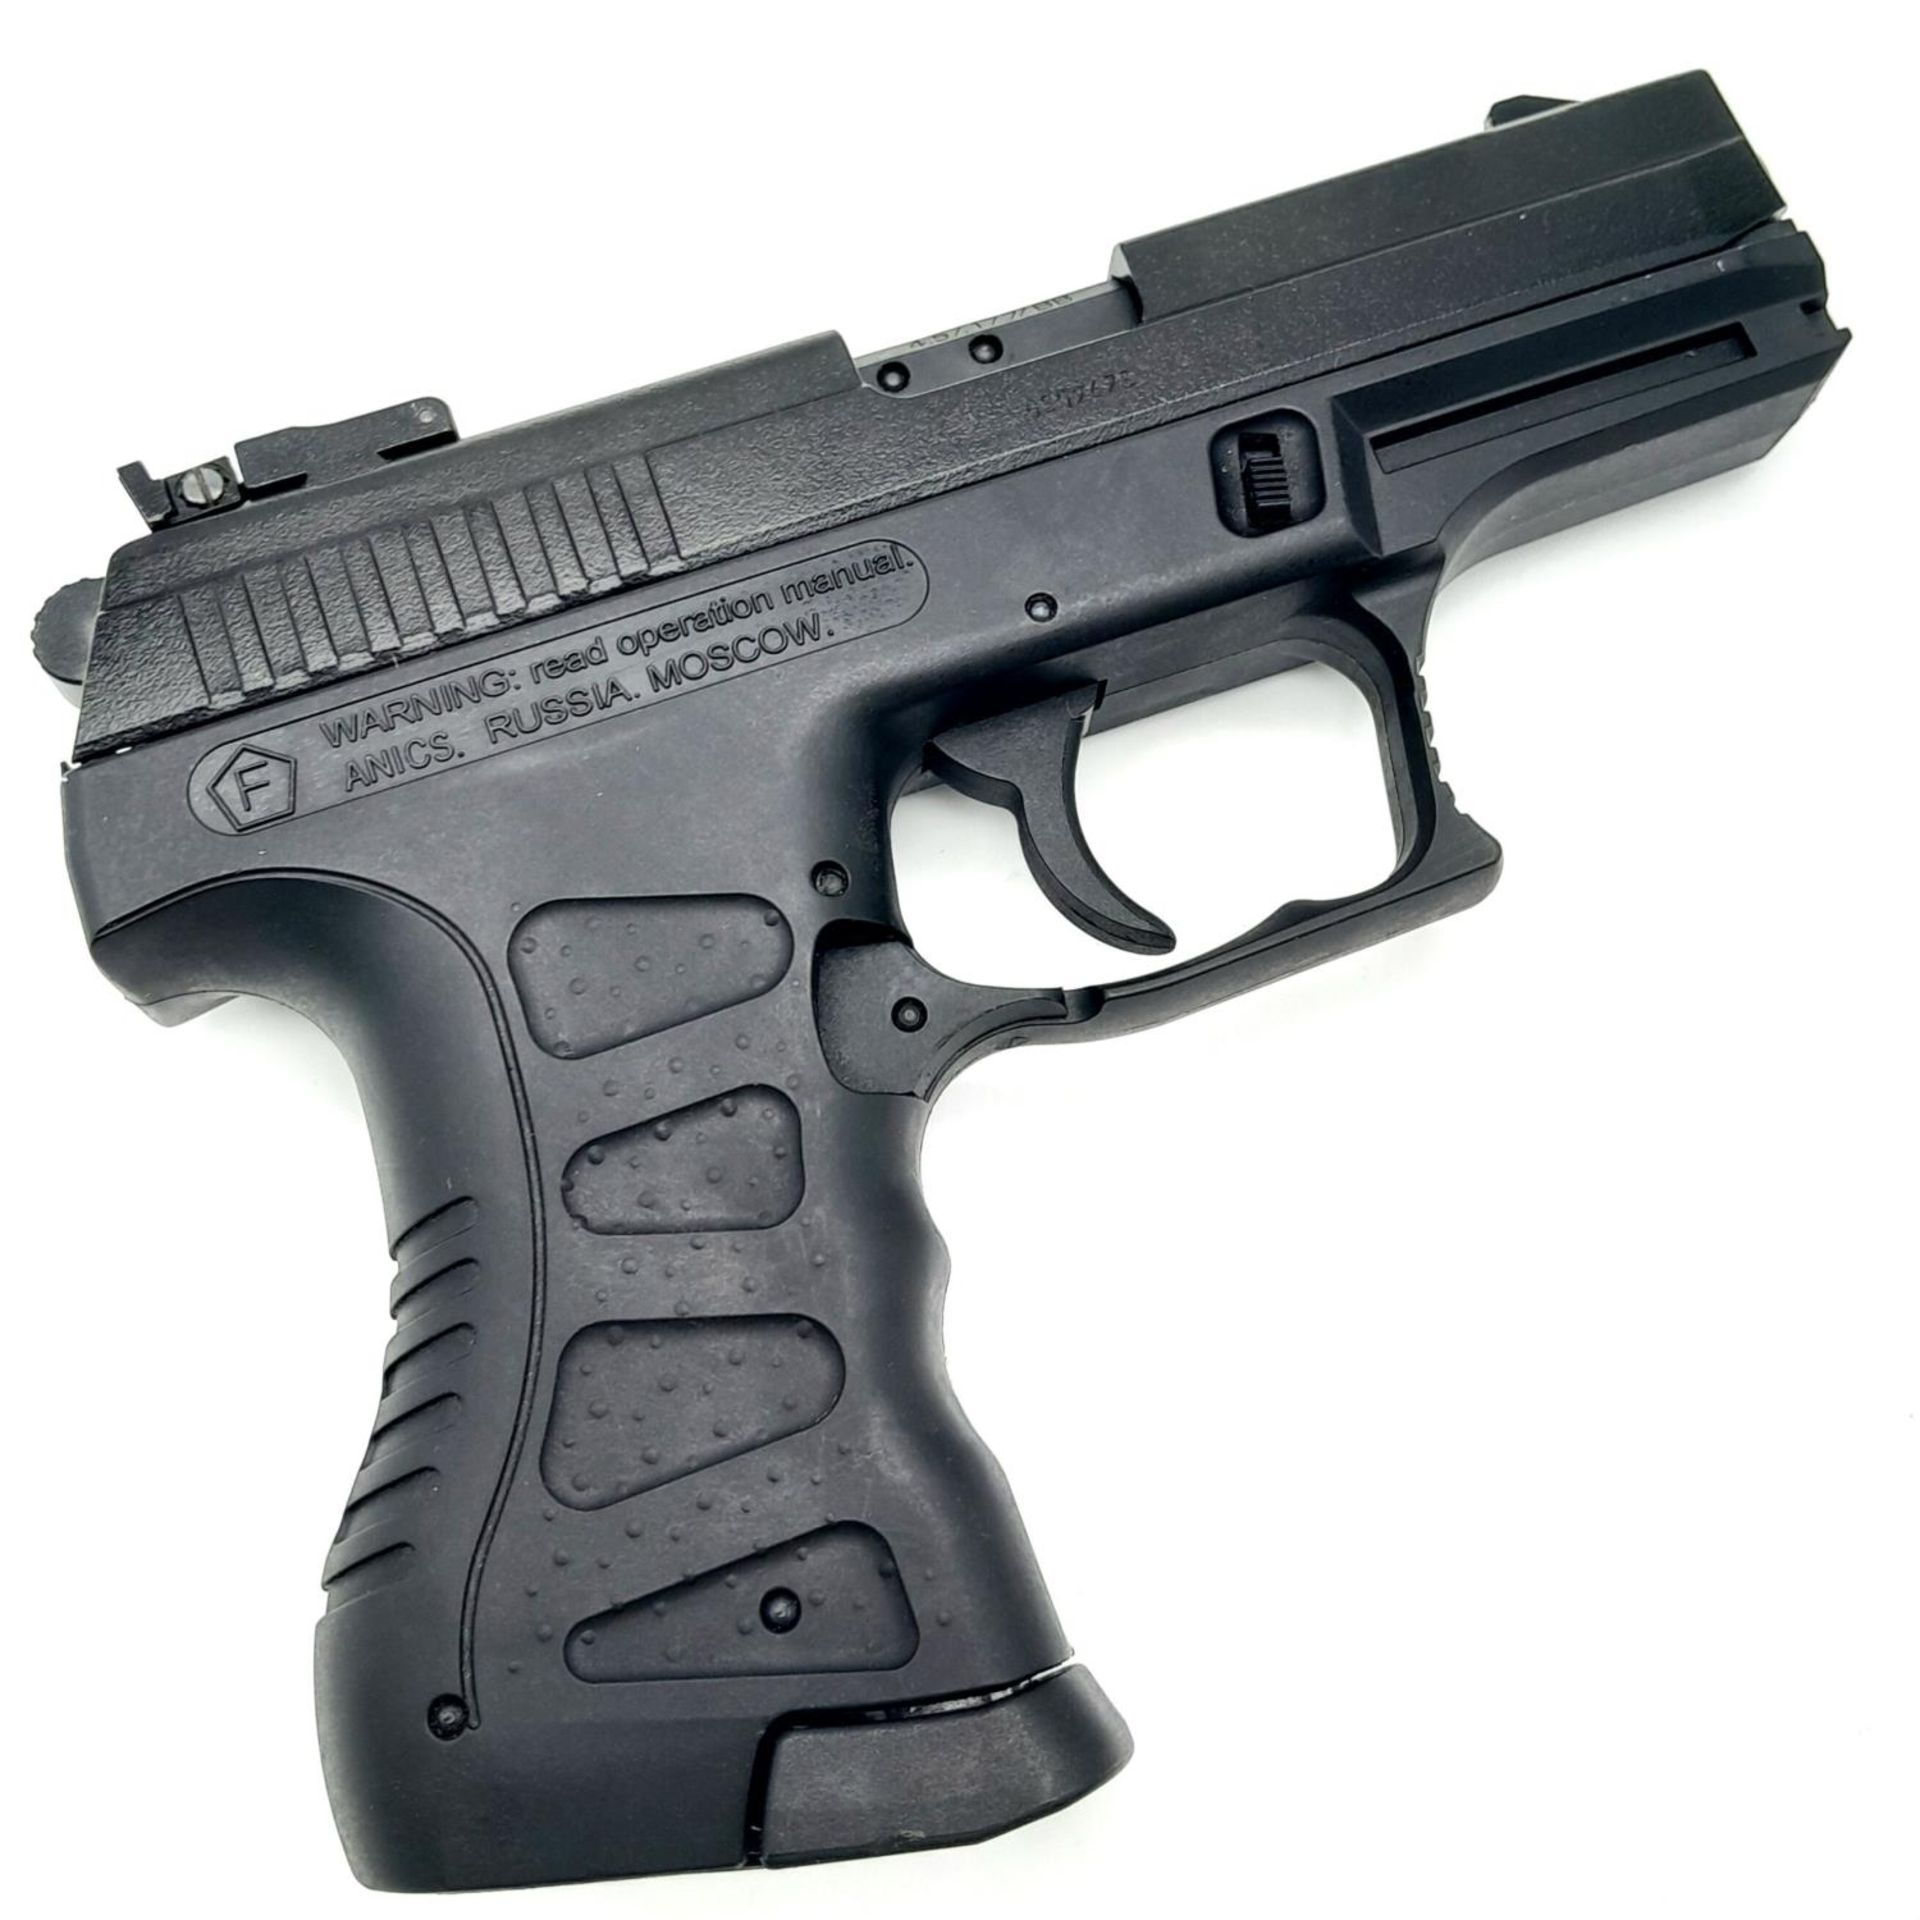 A Skif A-3000 C02 Air Pistol - .177 calibre. UK sales only. Over 18 Only. In fitted case. - Image 3 of 15